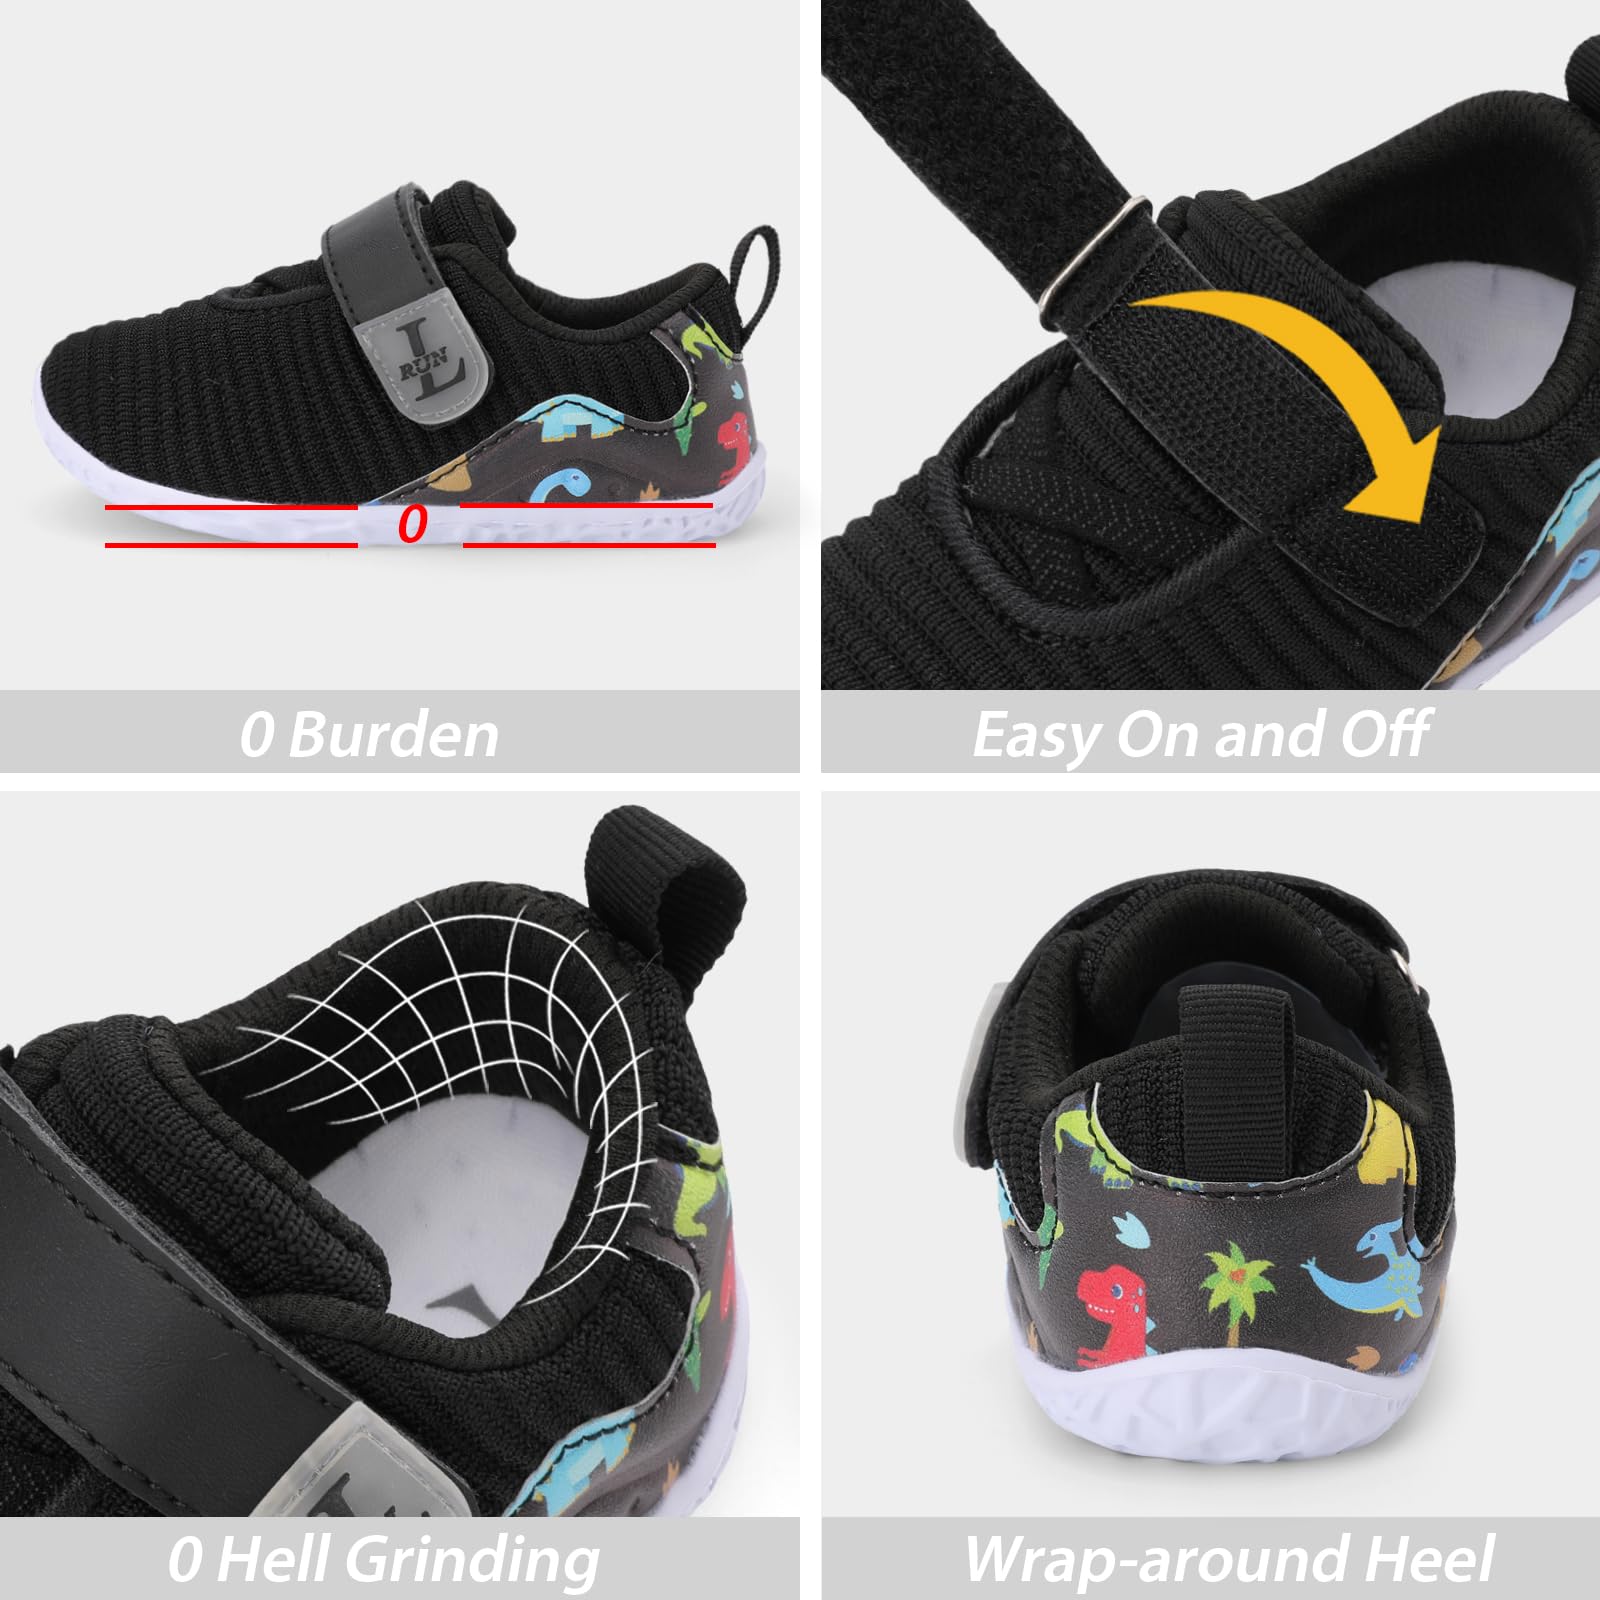 L-RUN Barefoot Shoes Toddler Sneakers Boys Girls Lightweight Shoes Knit Kids Walking Shoes for Indoor Outdoor